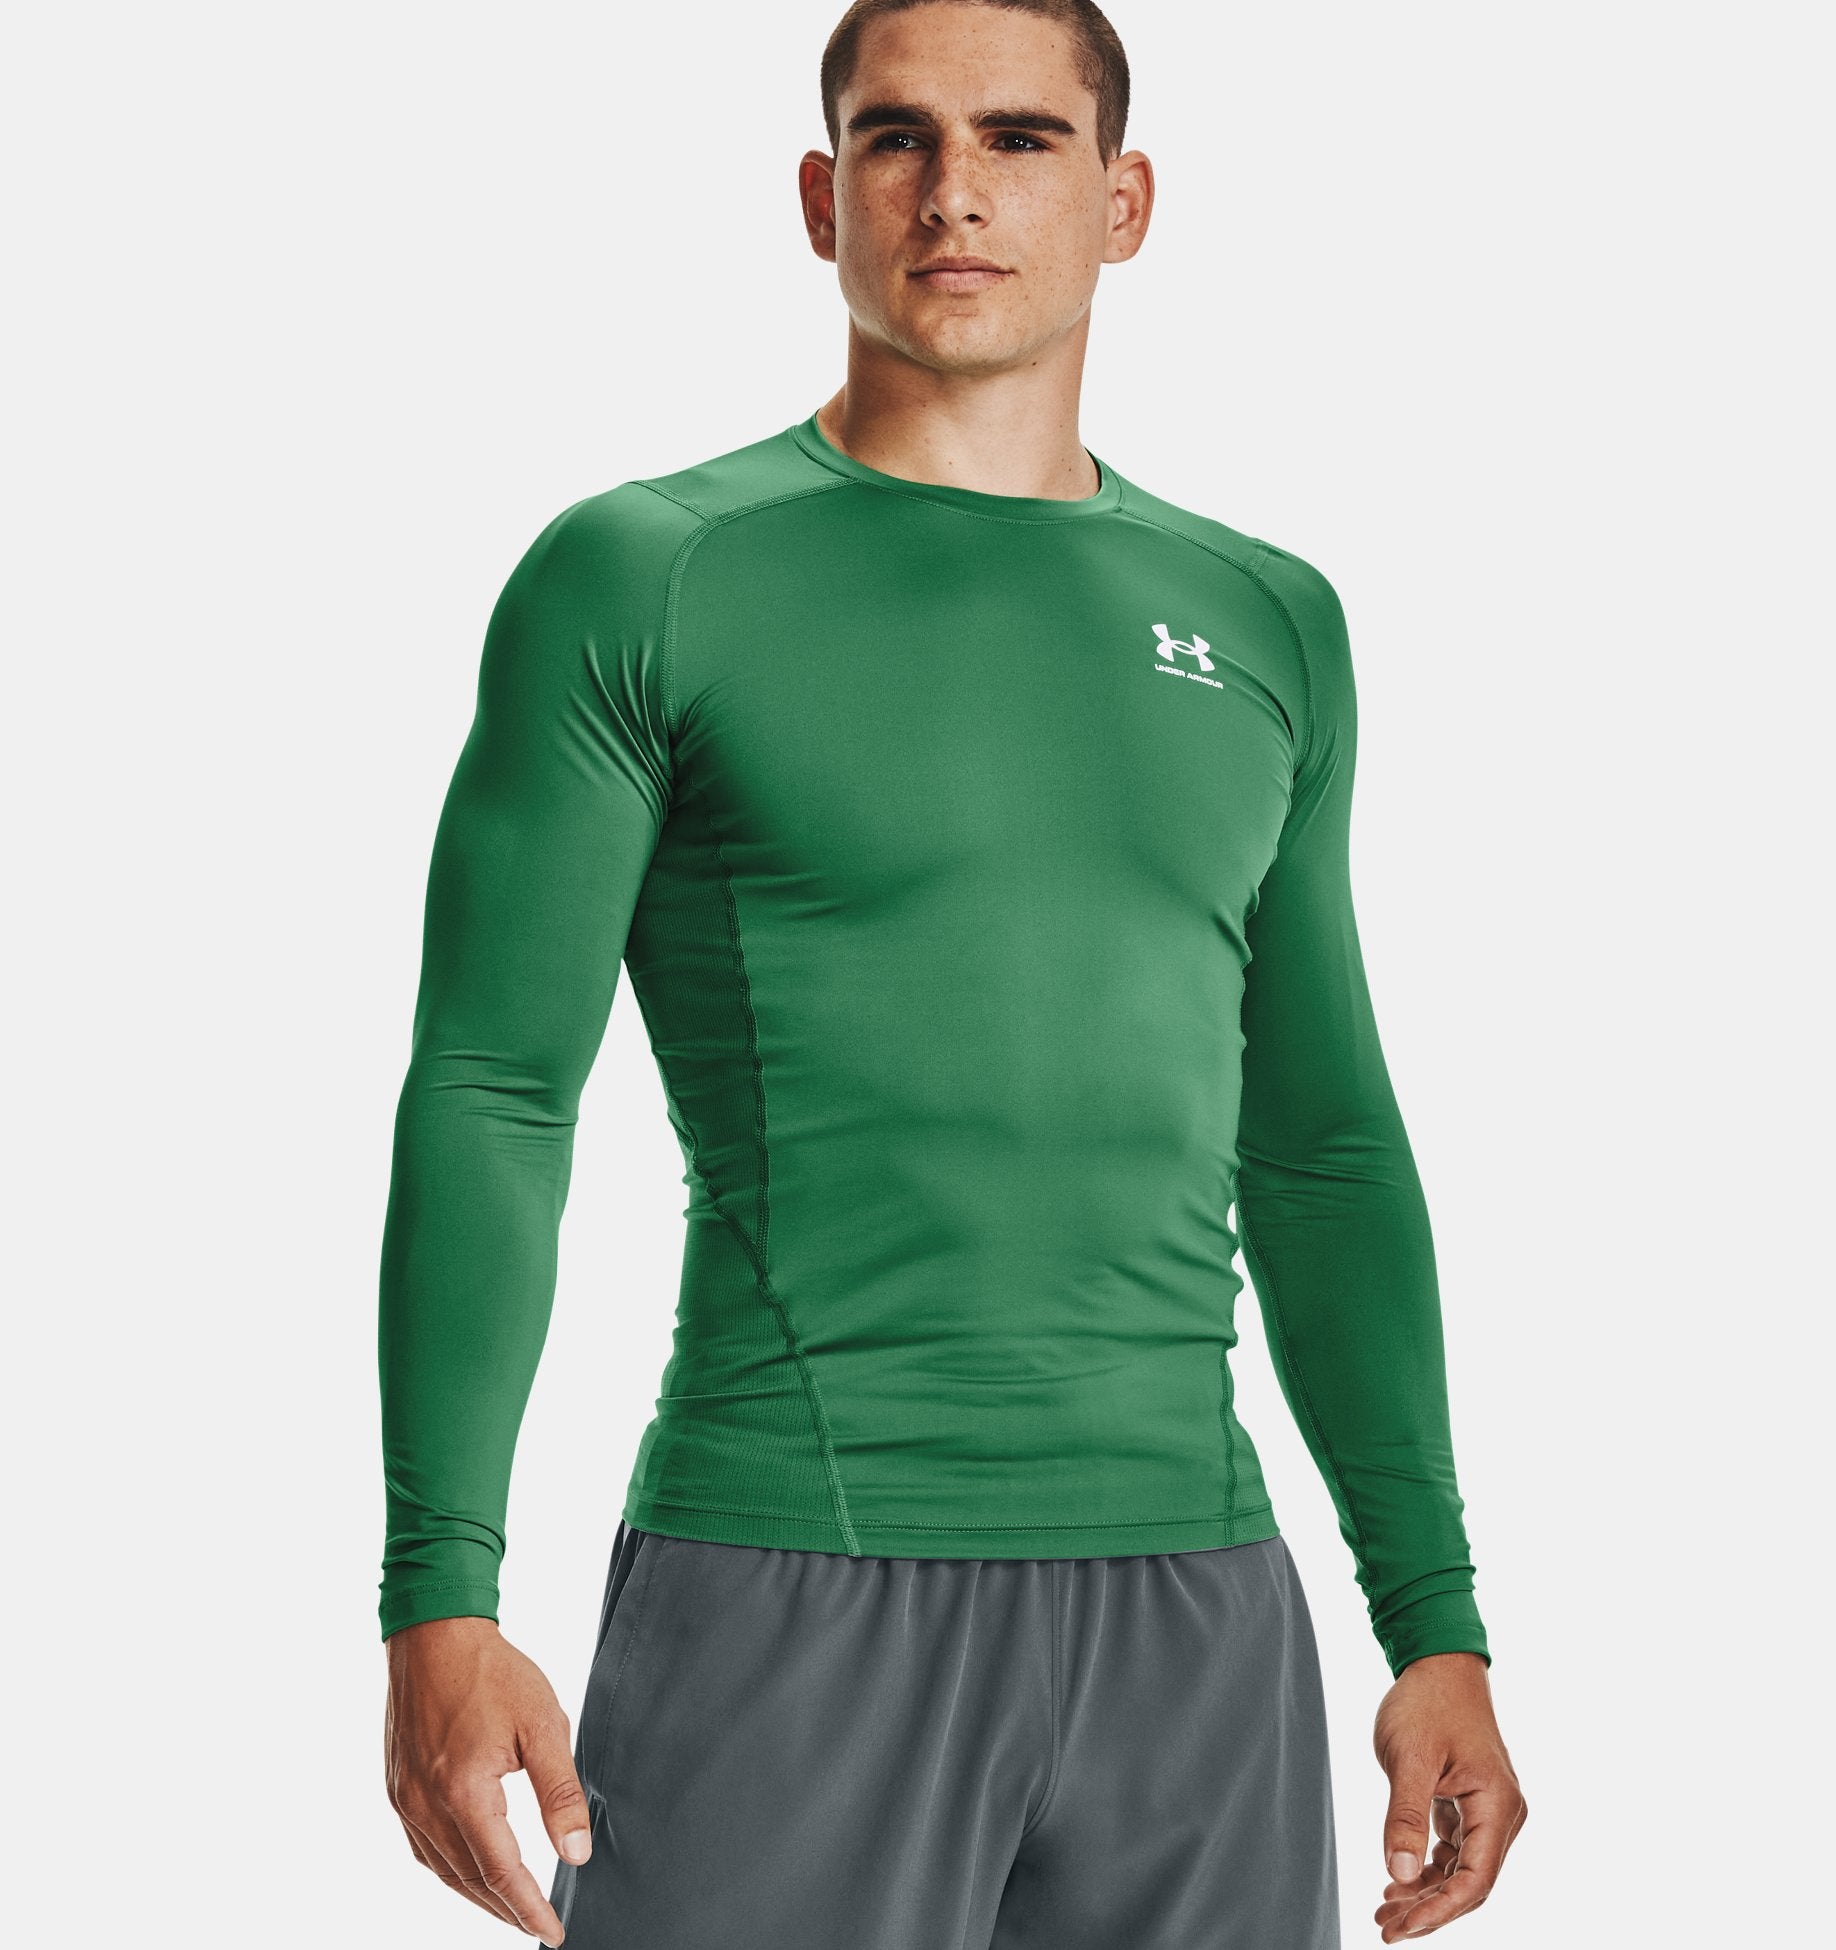  Under Armour Men's UA HeatGear® Armour Long Sleeve Compression  Shirt XL Gray : Clothing, Shoes & Jewelry